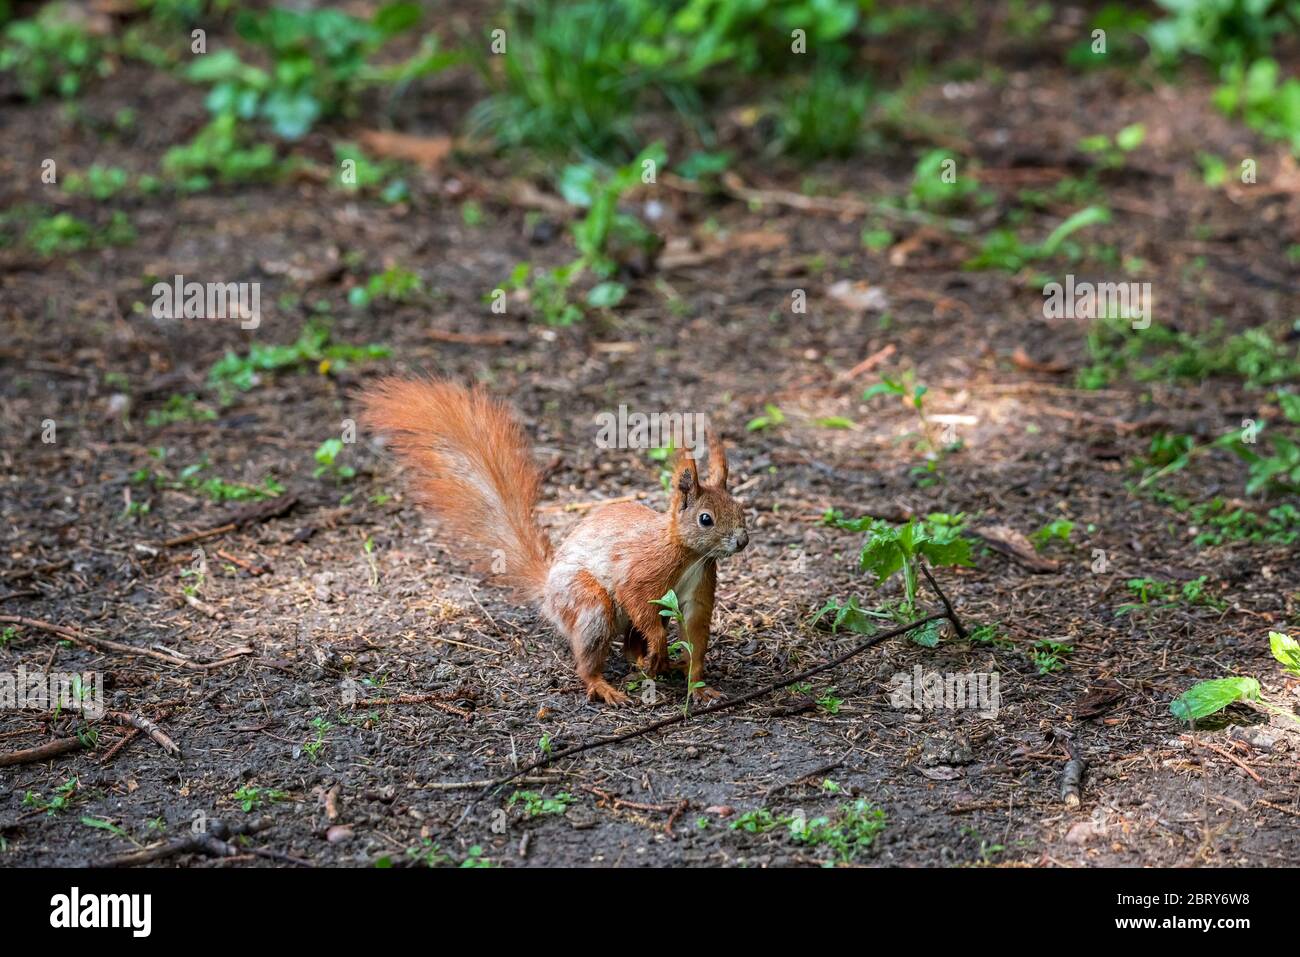 Red Squirrel In The Forest A Forest Animal Seen Up Close A Pet With A Red Tail And Large Eyes In The Spring Forest Between The Trees Stock Photo Alamy,Filet Crochet Patterns Animals